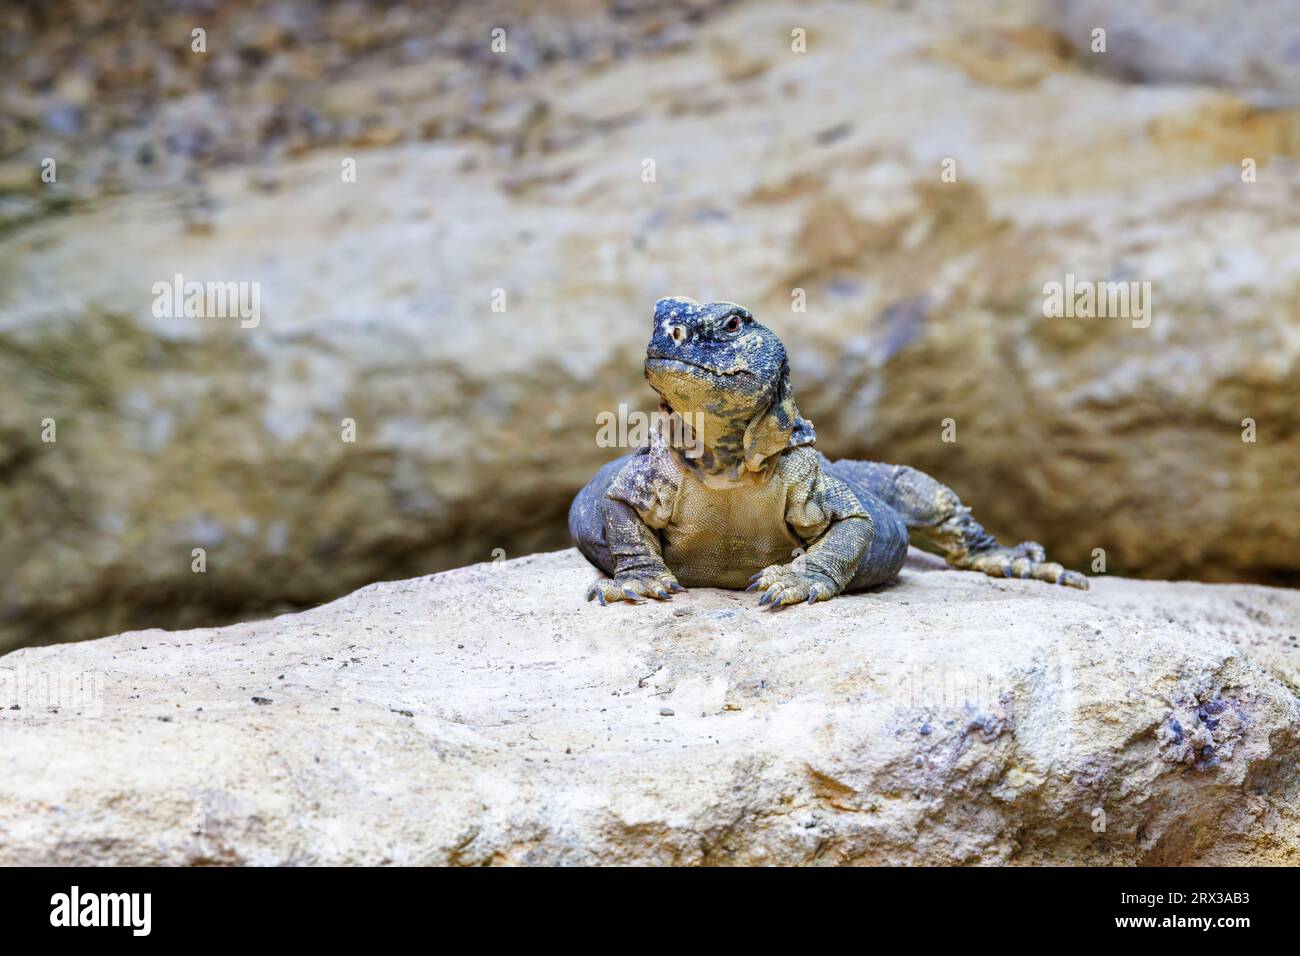 Egyptian spiny tailed lizard.  Uromastyx aegyptia, a desert agama endemic to North Africa and the Middle East. A vulnerable species with populations d Stock Photo